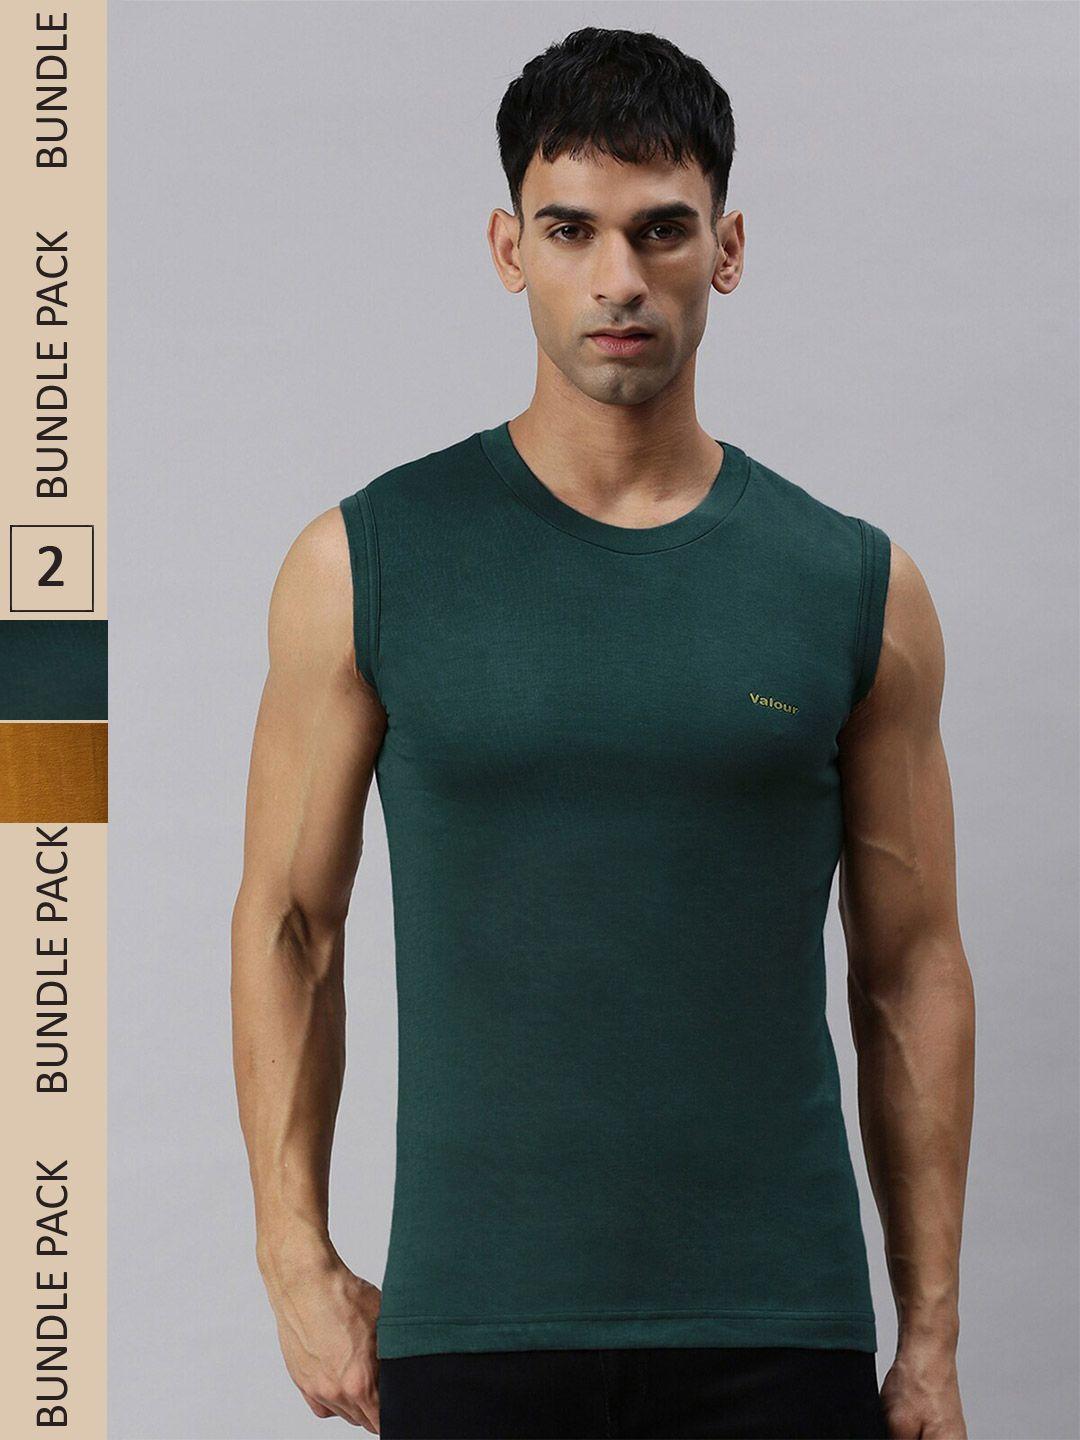 lux cozi pack of 2 round neck sleeveless slim fit cotton t-shirt